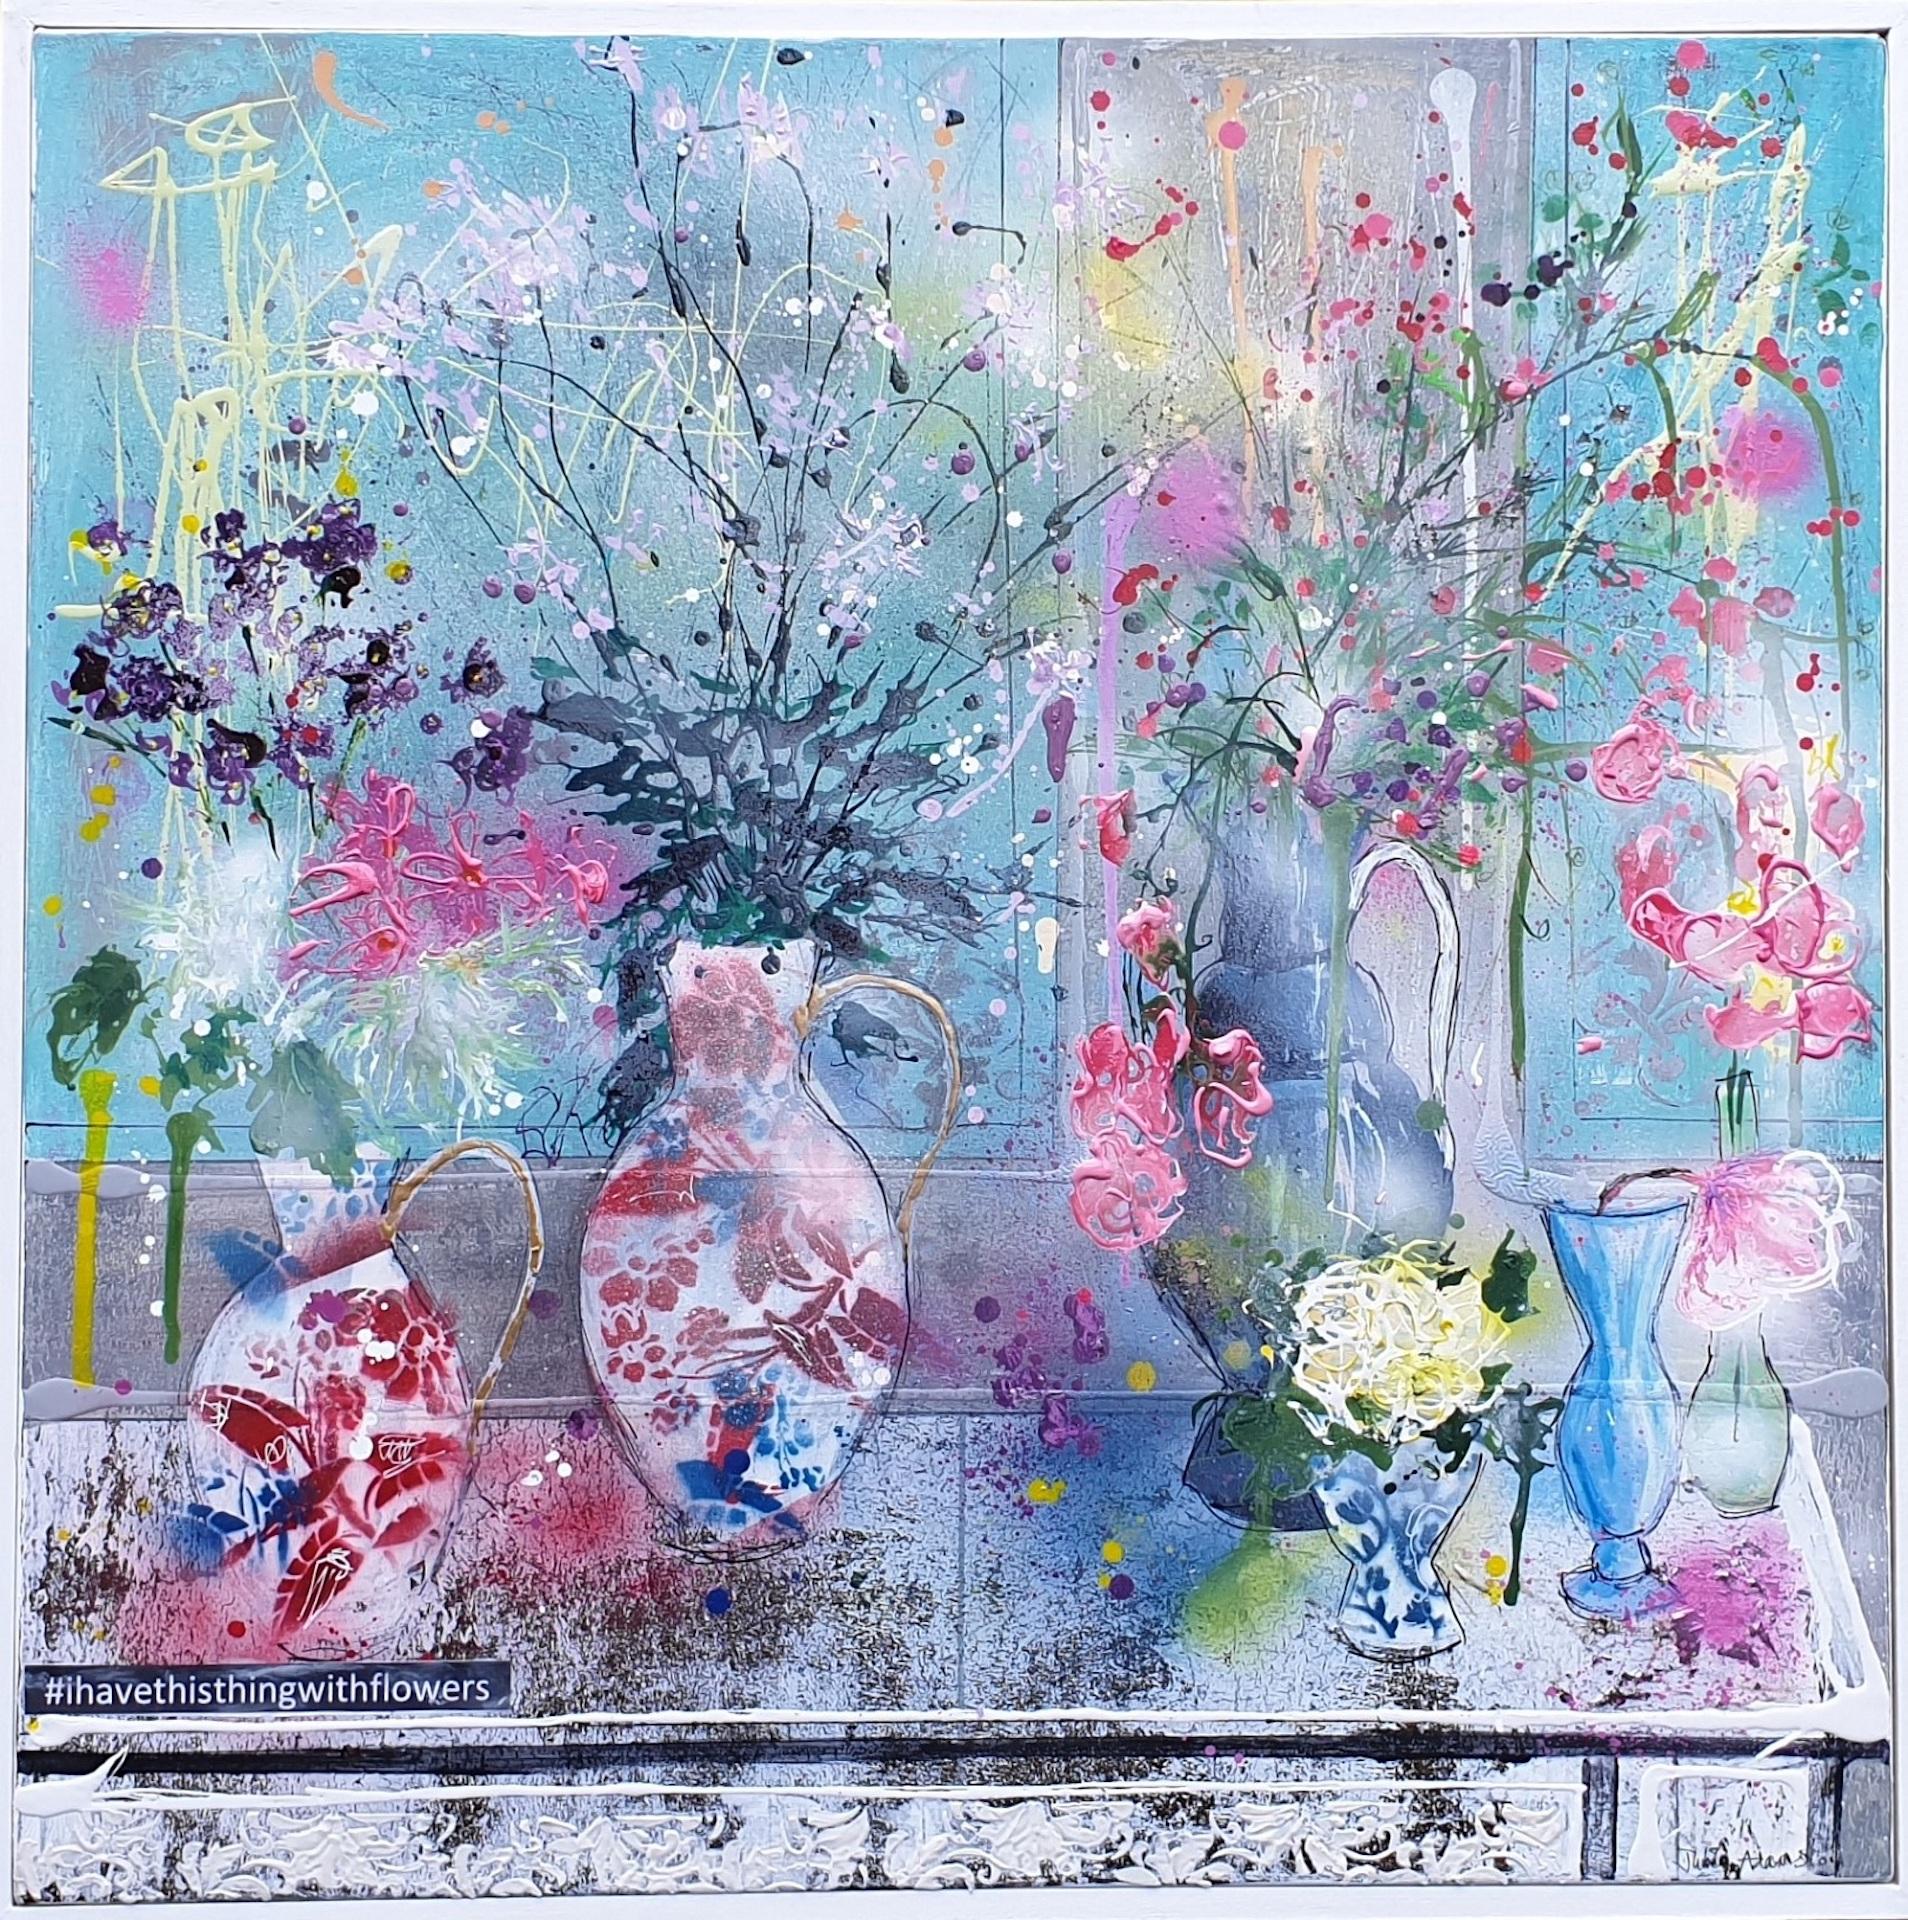 #ihavethisthingwithflowers by Julia Adams is a contemporary mixed media Art